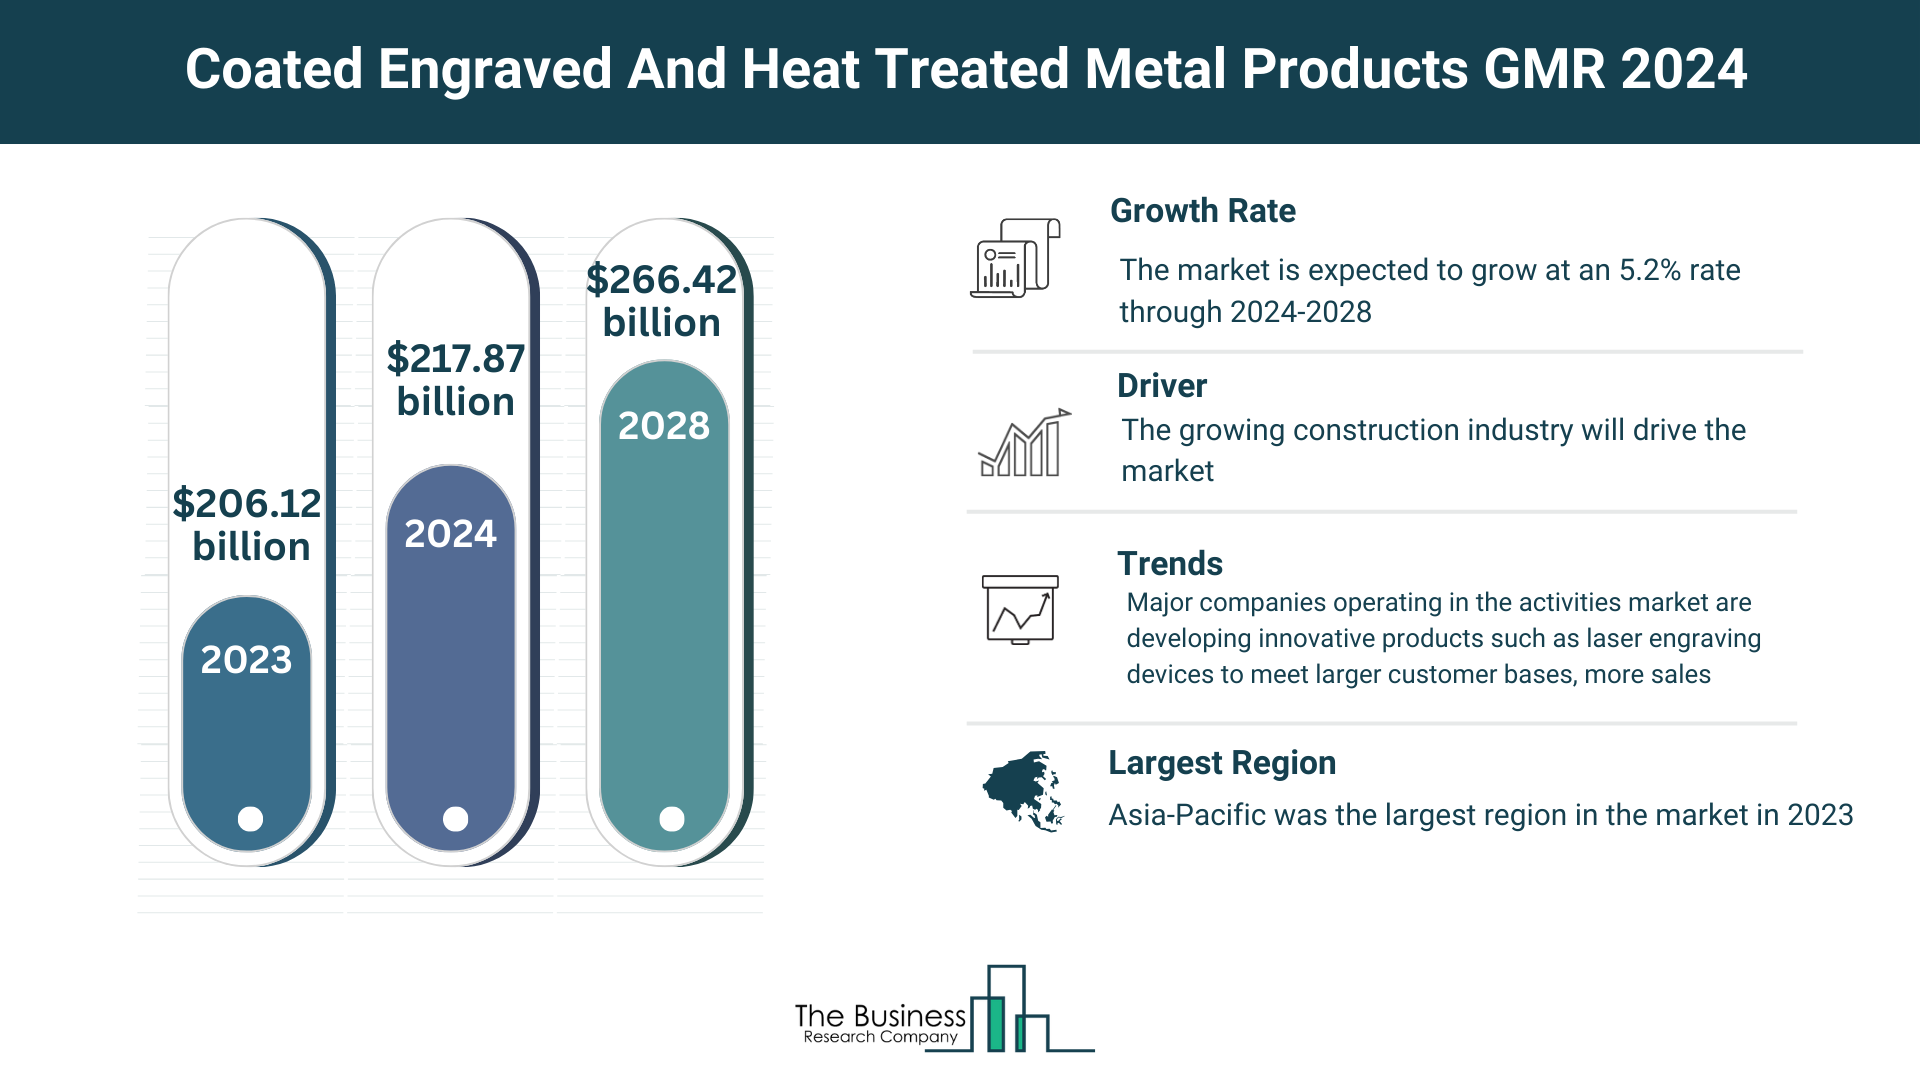 Understand How The Coated Engraved And Heat Treated Metal Products Market Is Set To Grow In Through 2024-2033